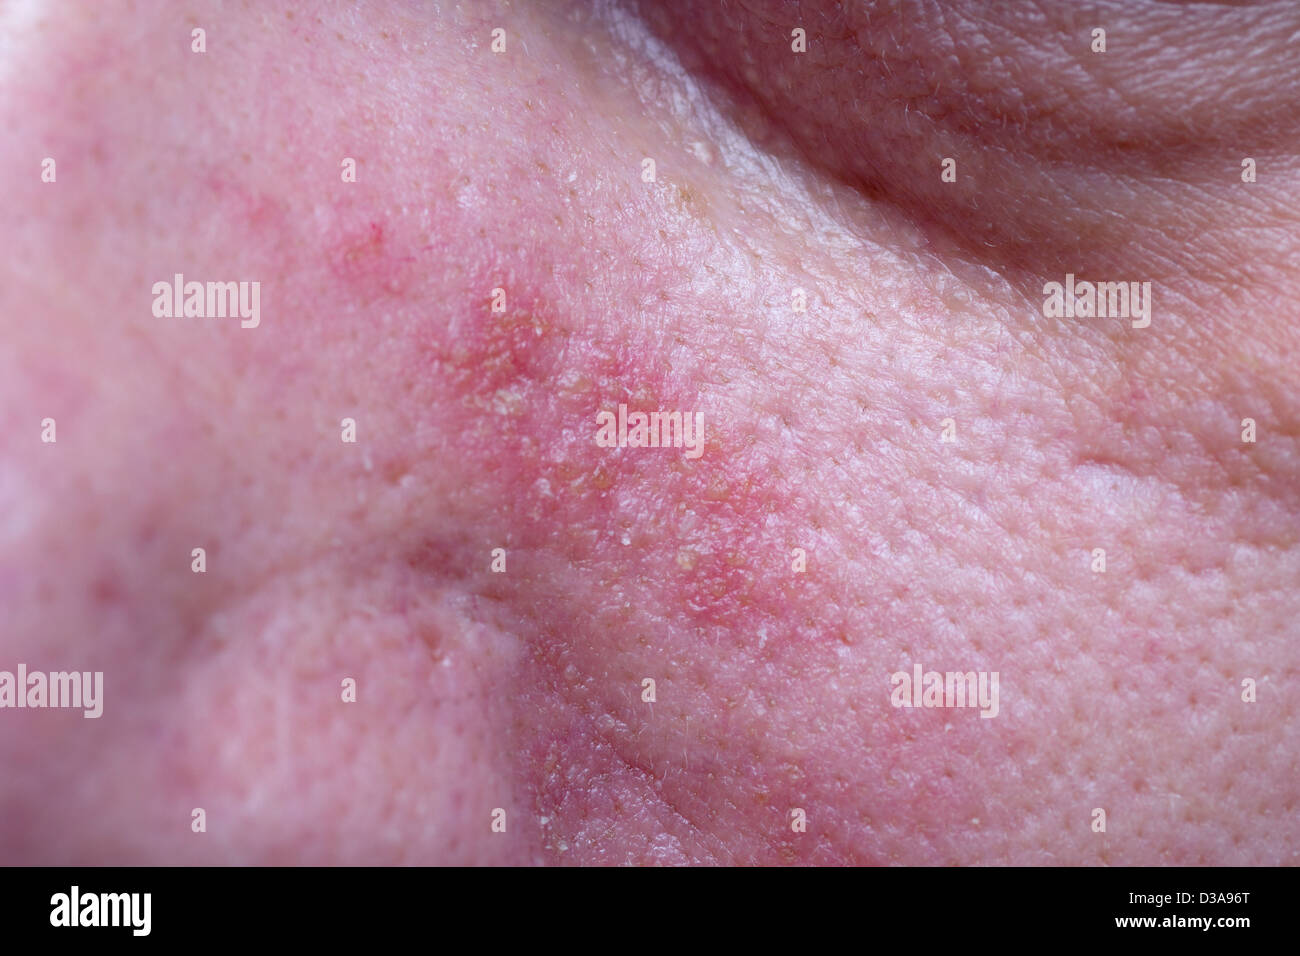 Seborrhoeic dermatitis on the face of a male (40s) Stock Photo